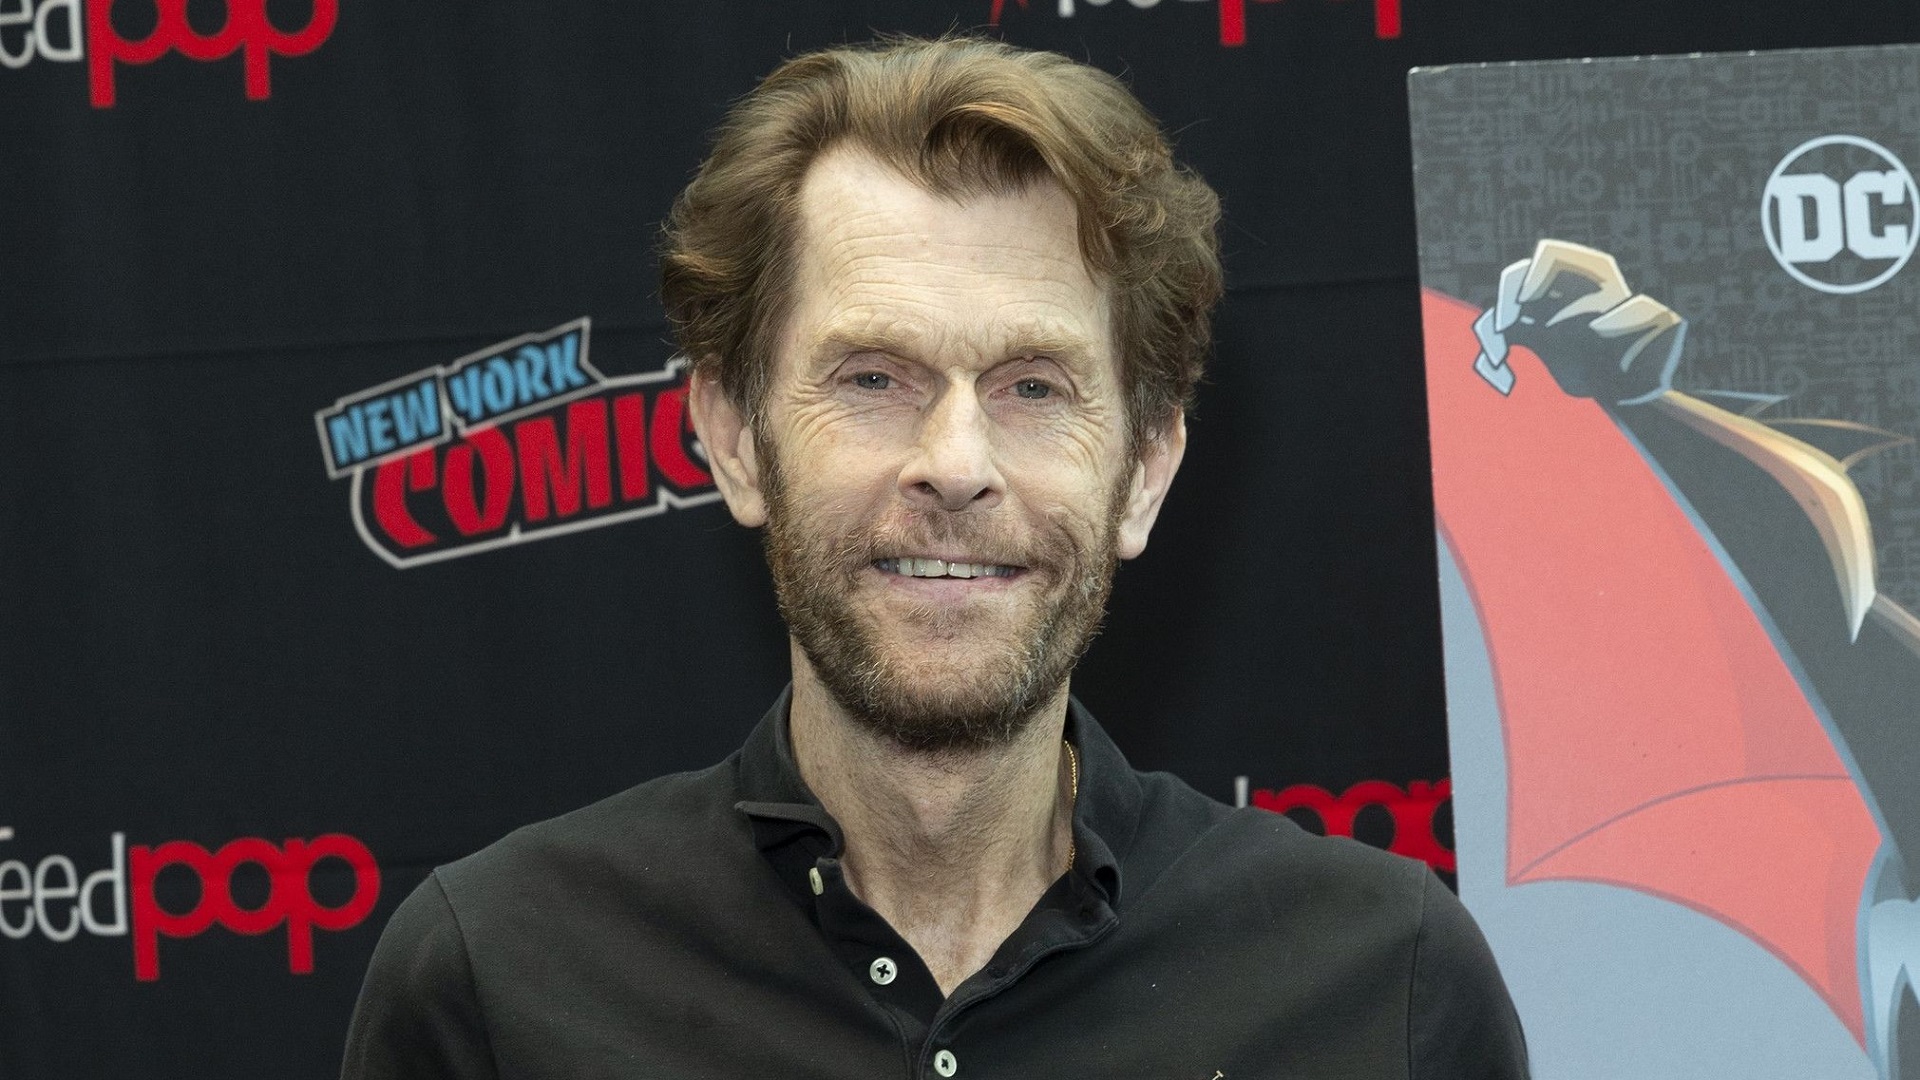 Kevin Conroy & Christopher Reeve Shared a Connection Beyond DC